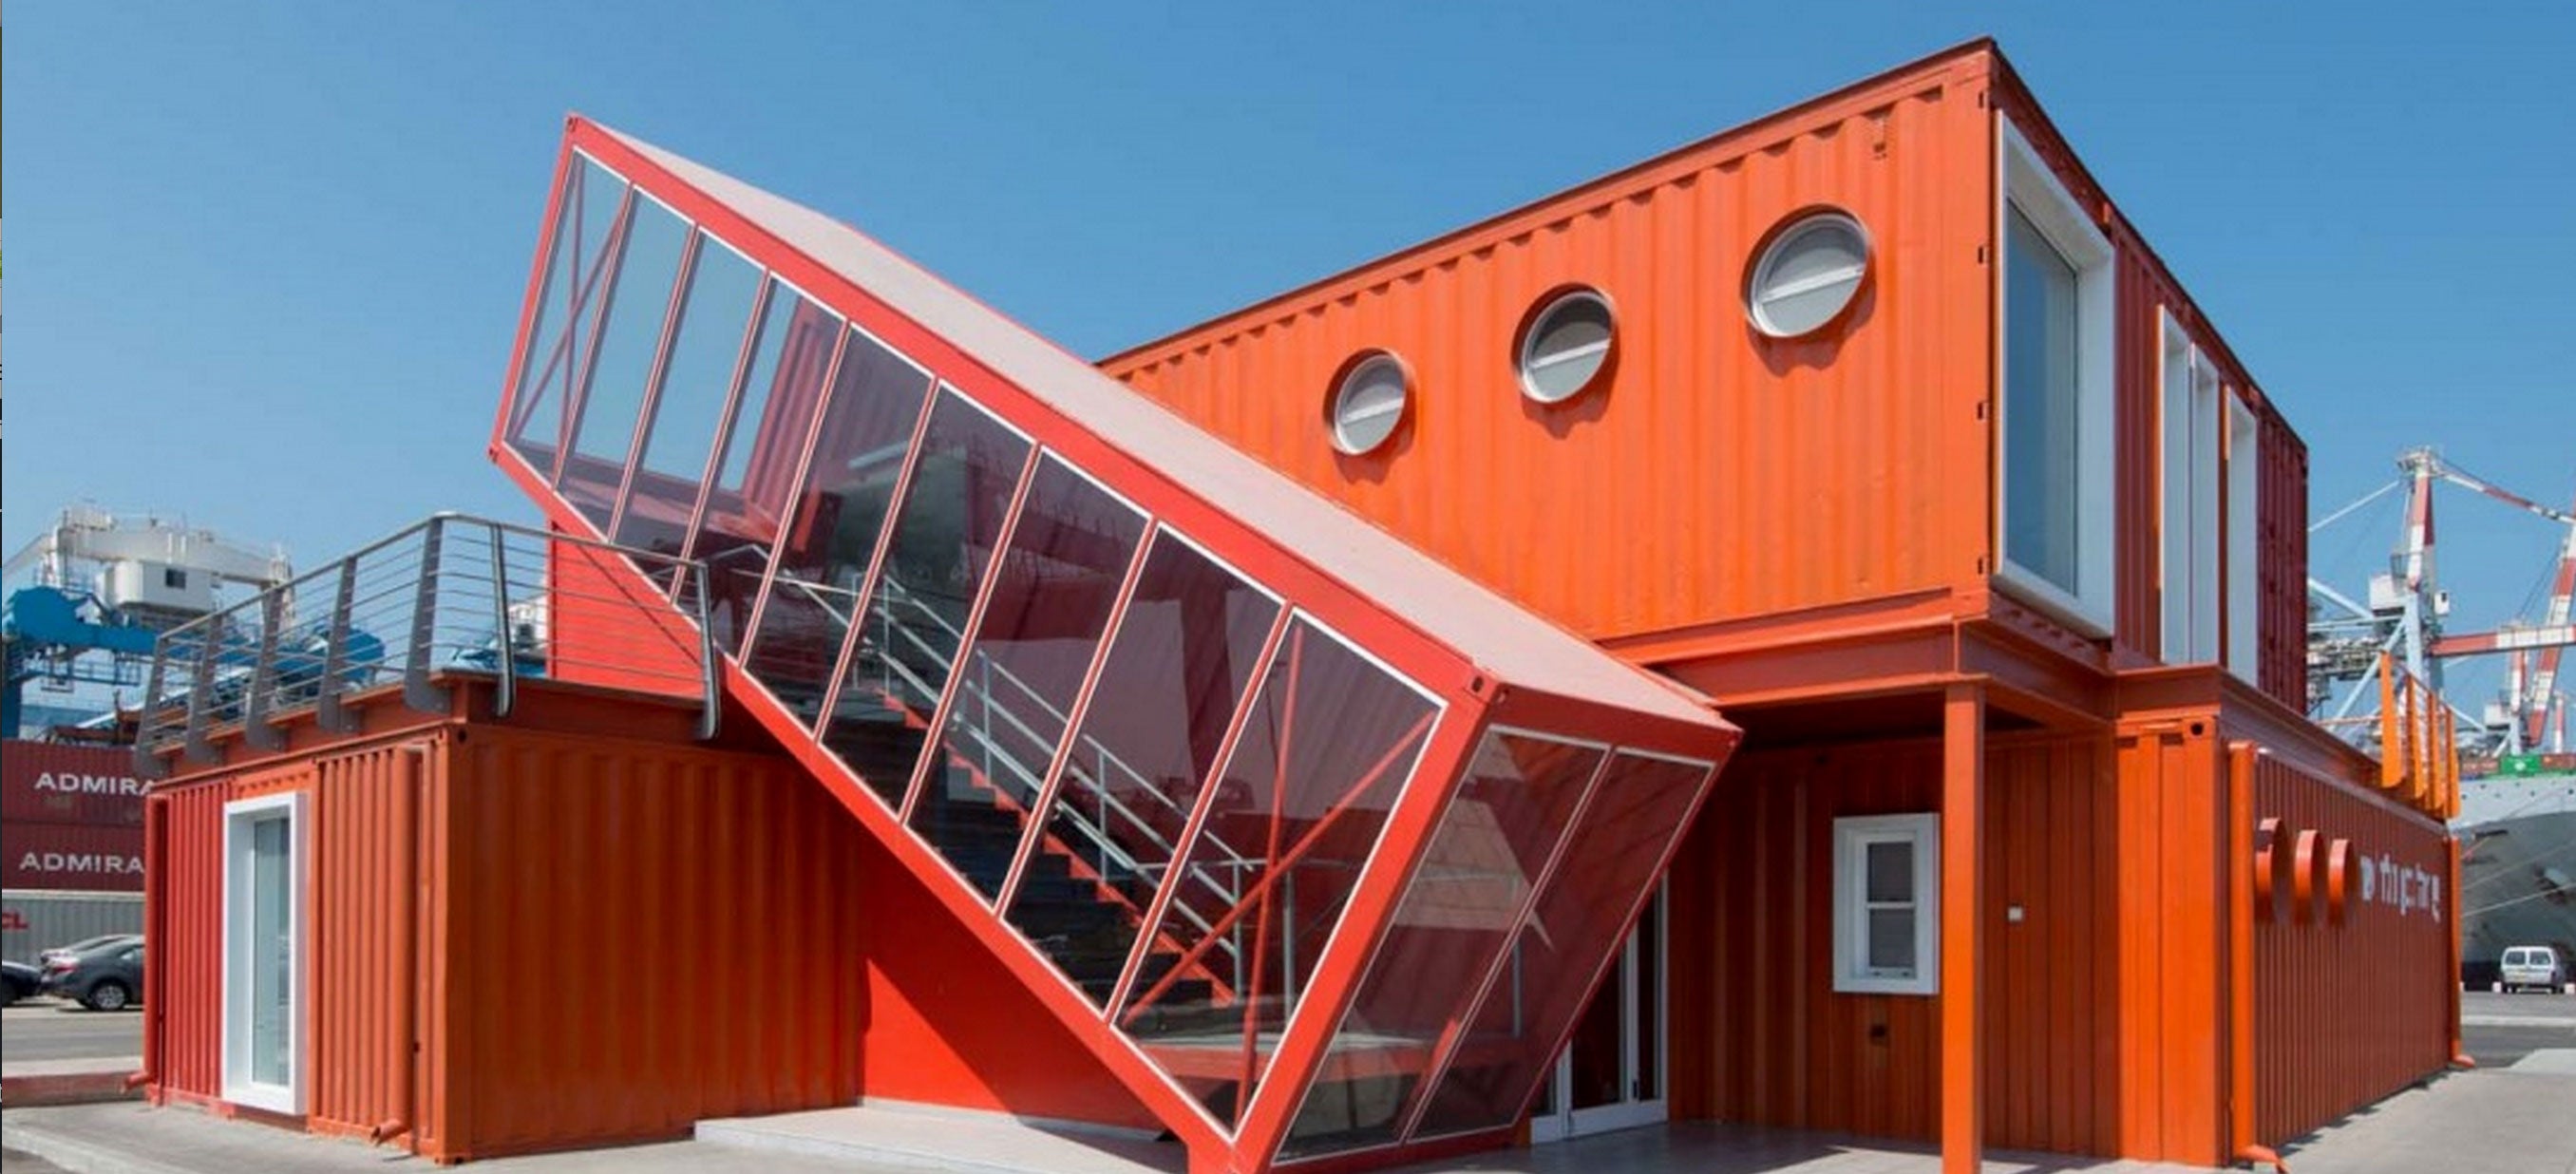 construction companies that build shipping container homes